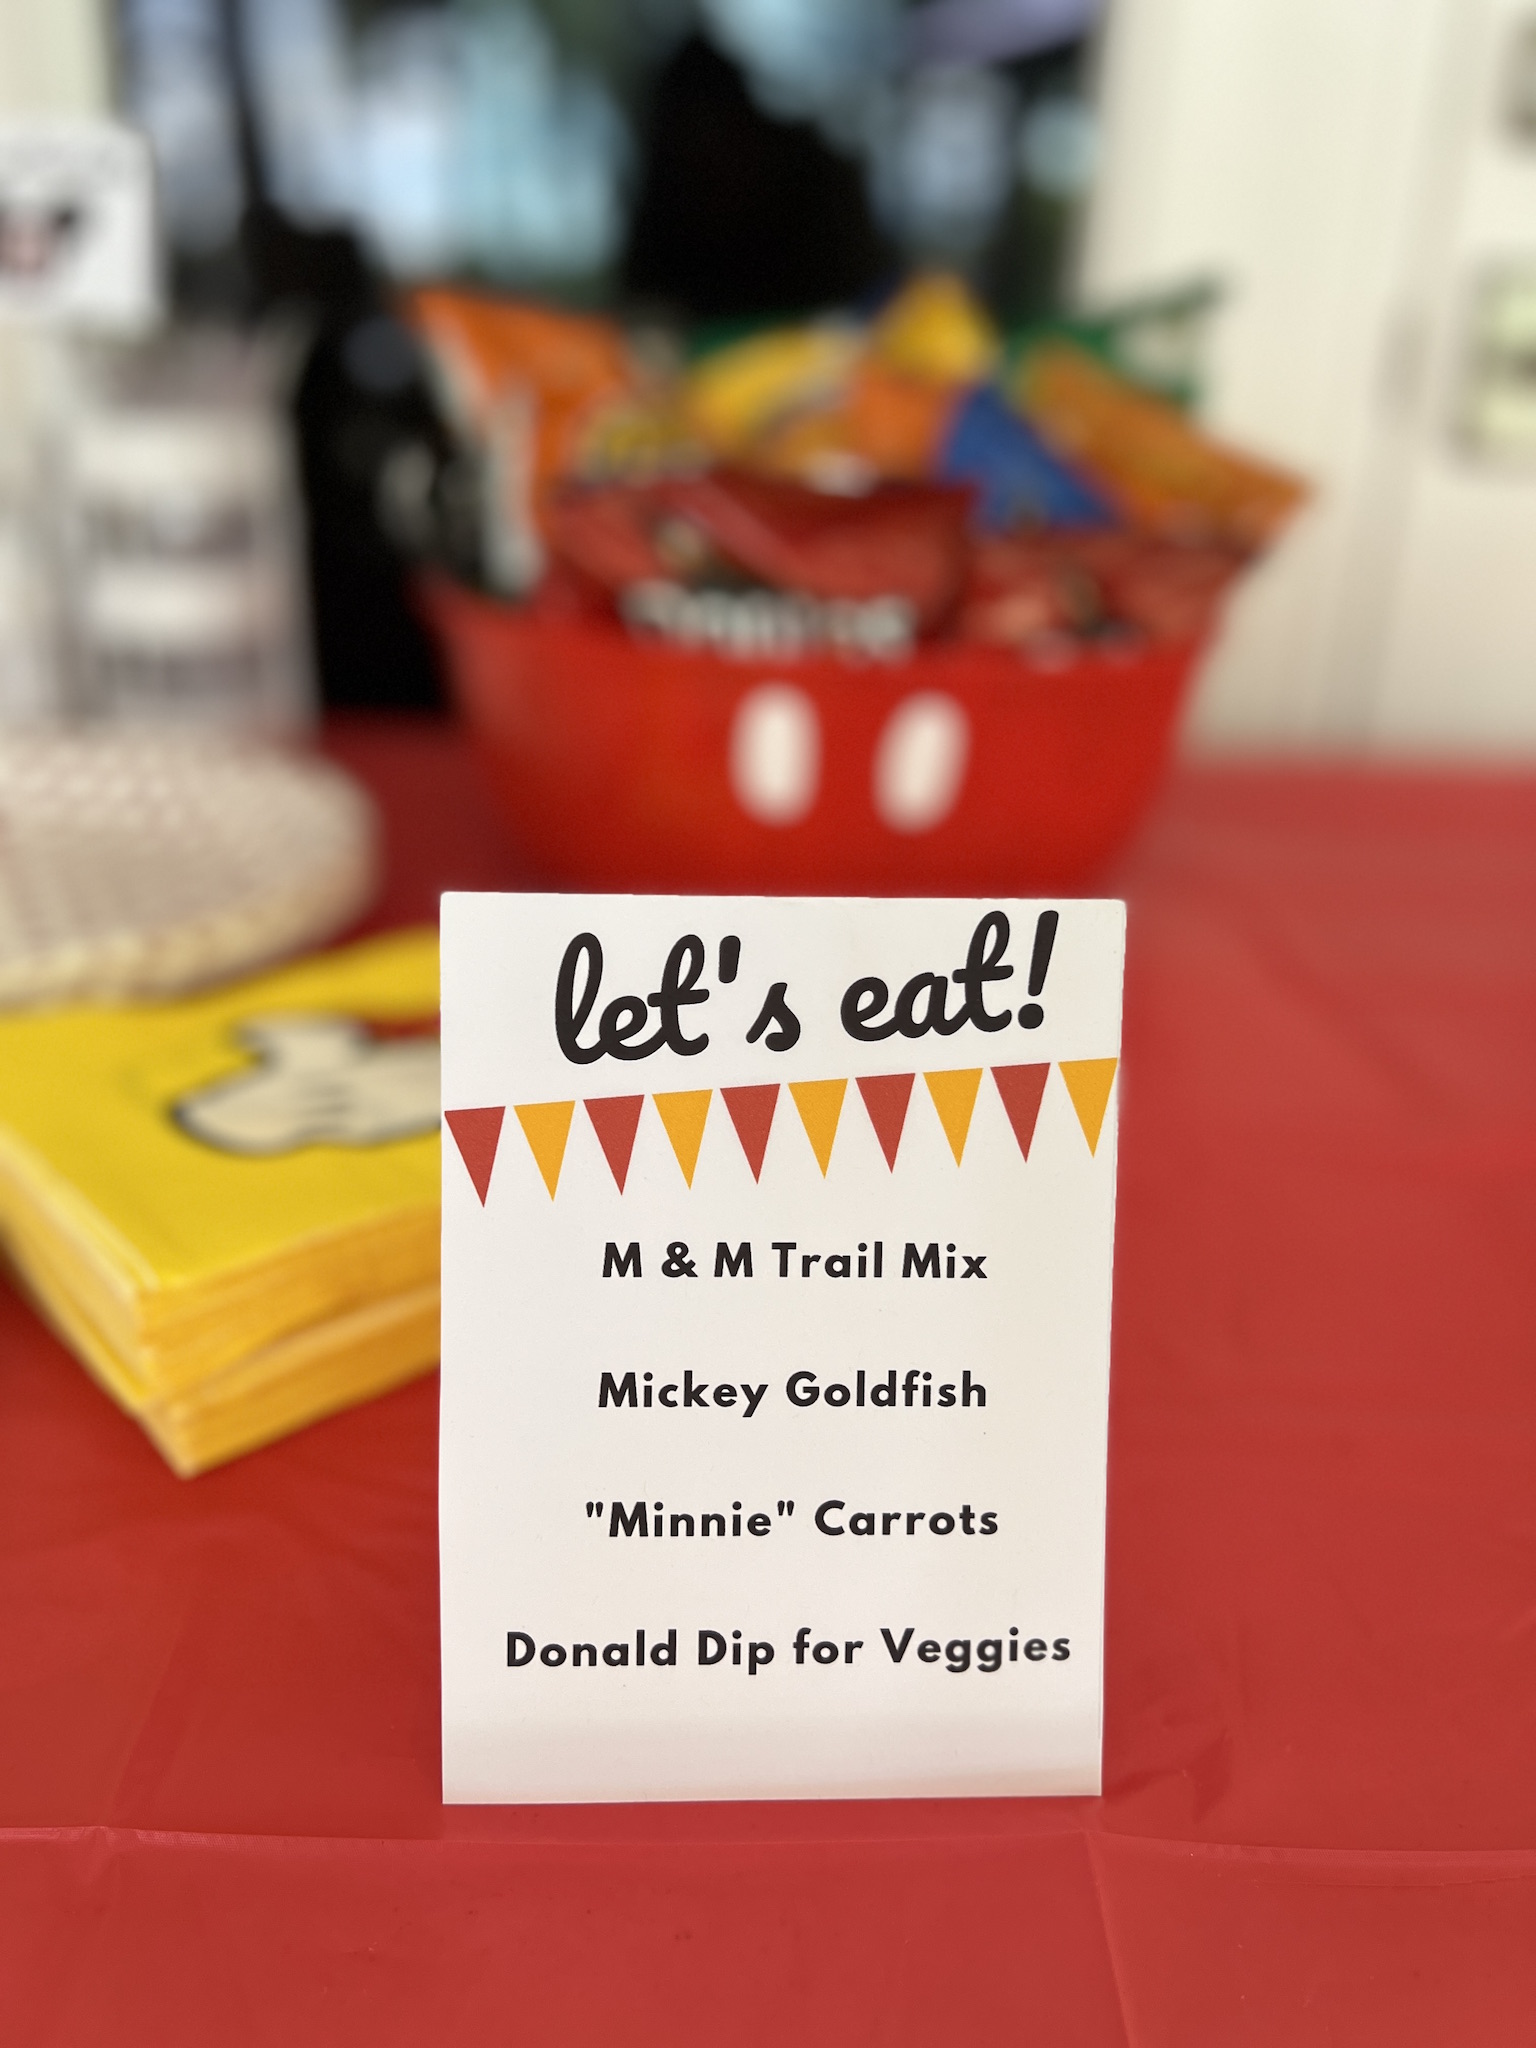 Themed snack foods at Pepper's Magical "Mickey & Minnie Mouse" 3rd Birthday Pool Party | Creative ideas for hosting a magical Mickey & Minnie themed birthday bash for your little Mouseketeer with do-able decor, punny snacks, and party games that are fun for all ages! via thinkingcloset.com